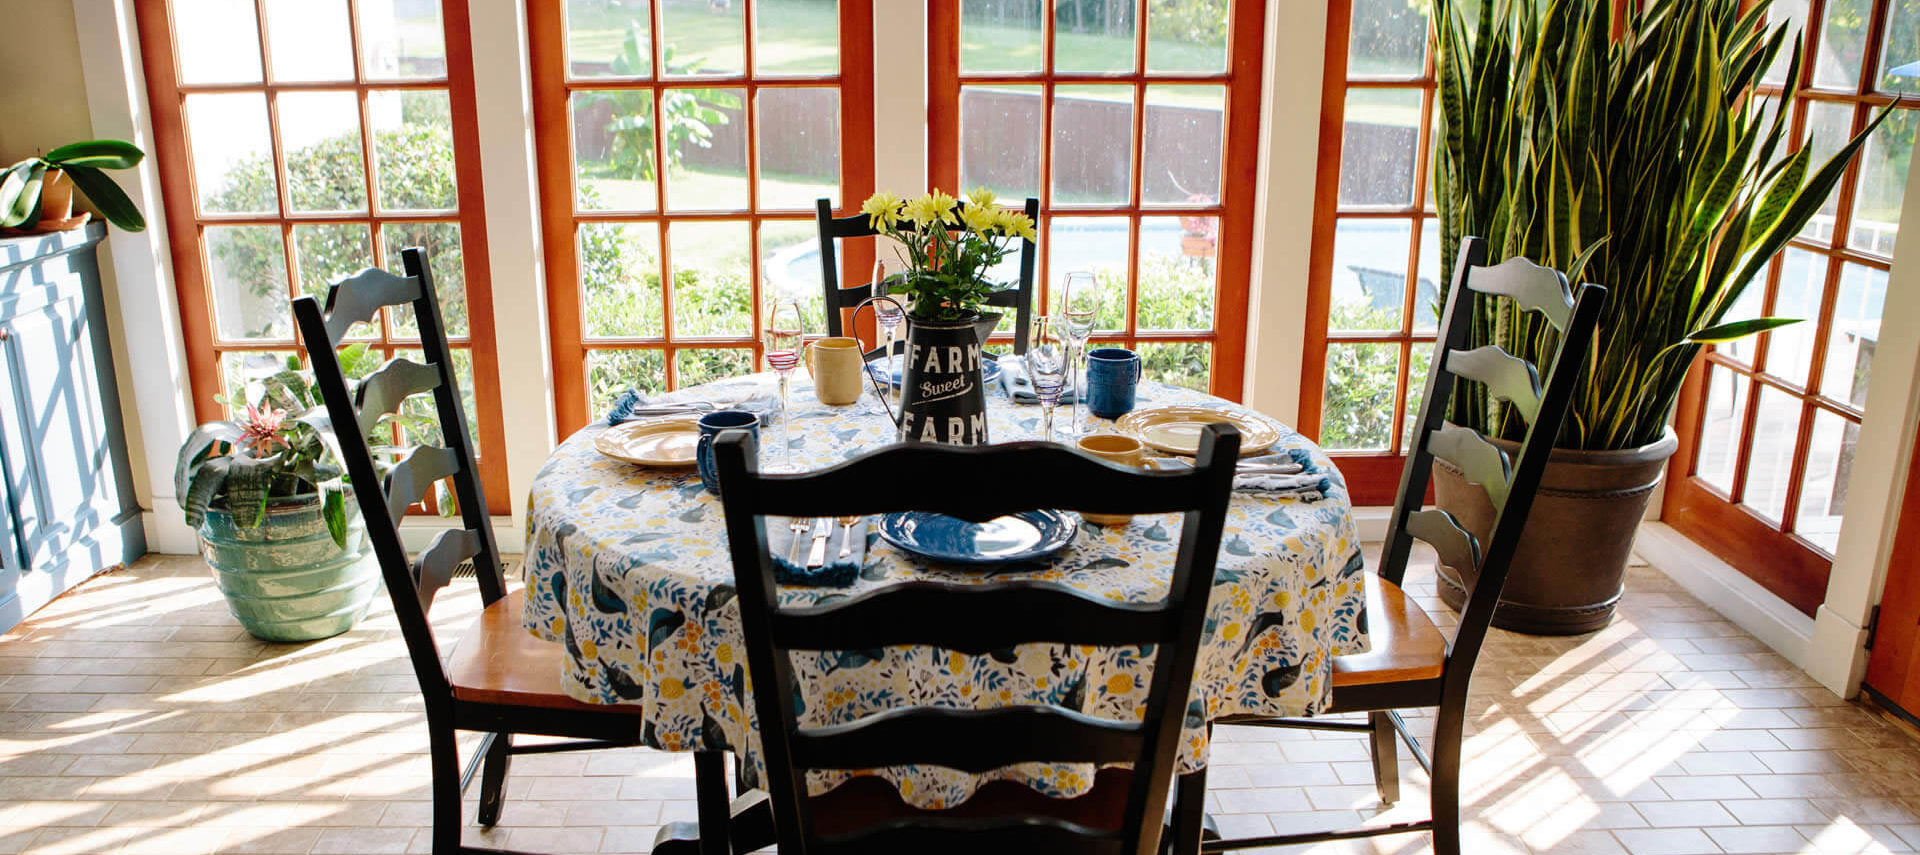 Small four-top table with a flowered cloth in front of a large window in a bright and airy breakfast room